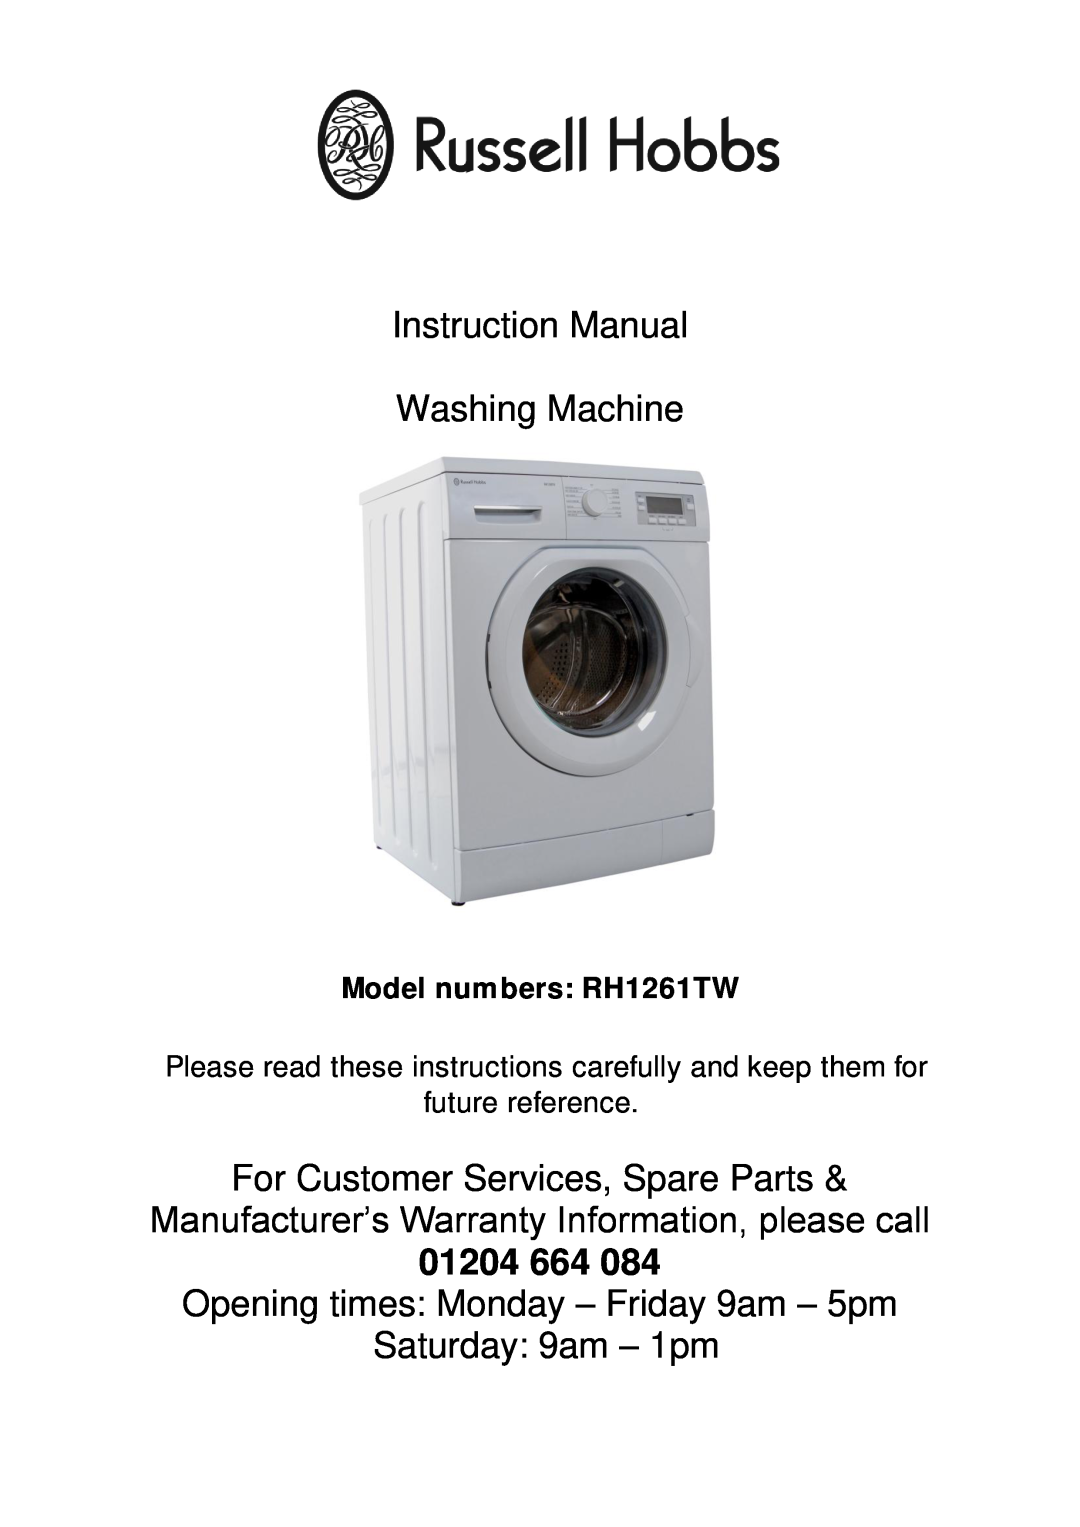 Russell Hobbs instruction manual 01204 664, Instruction Manual Washing Machine, Model numbers RH1261TW 